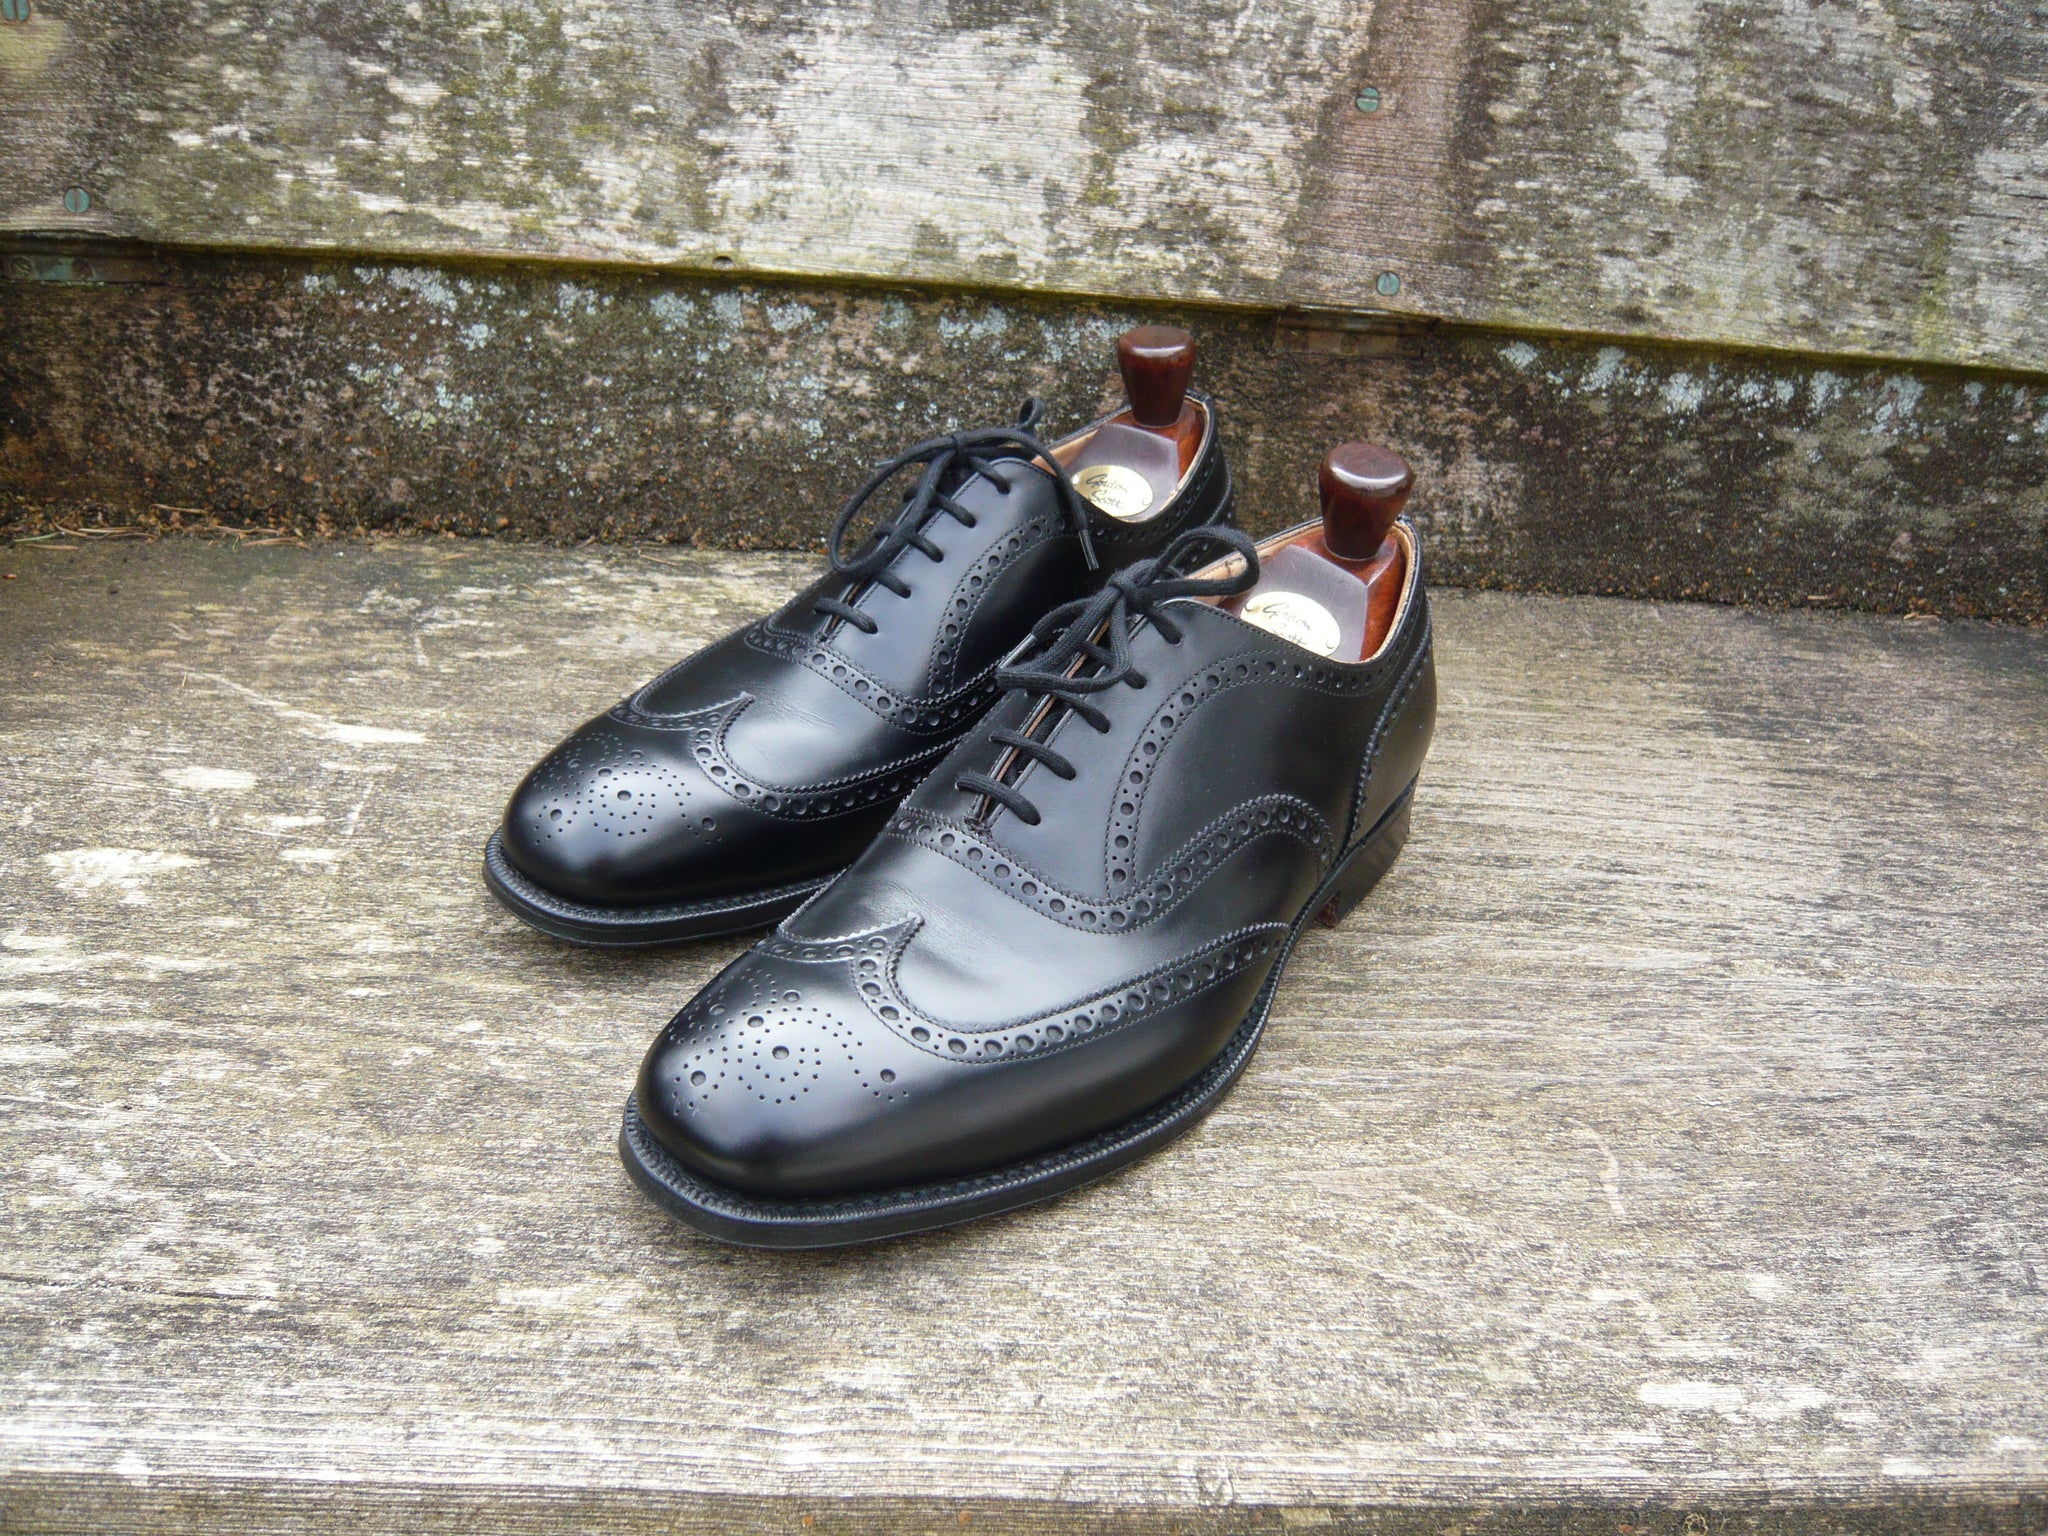 Chetwynd full brogue Oxford shoes